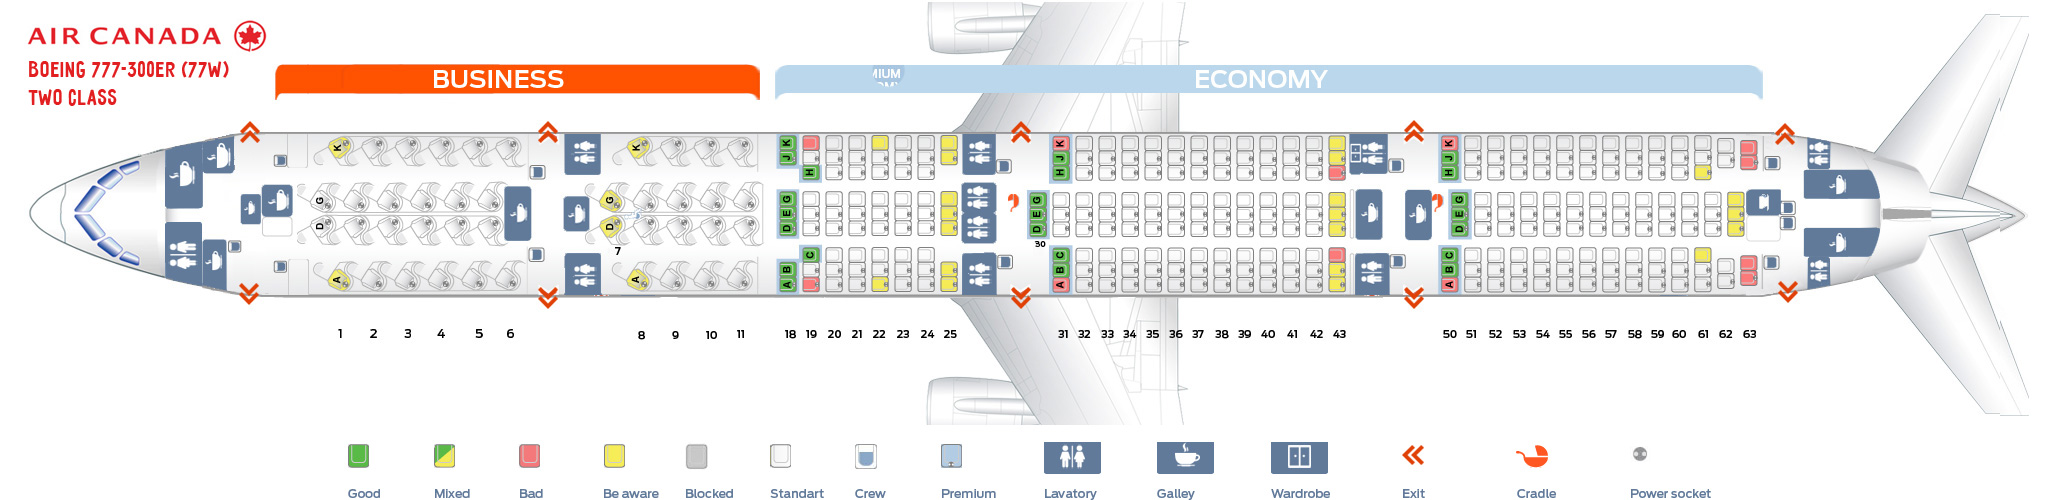 Seat map Boeing 777300 Air Canada. Best seats in plane